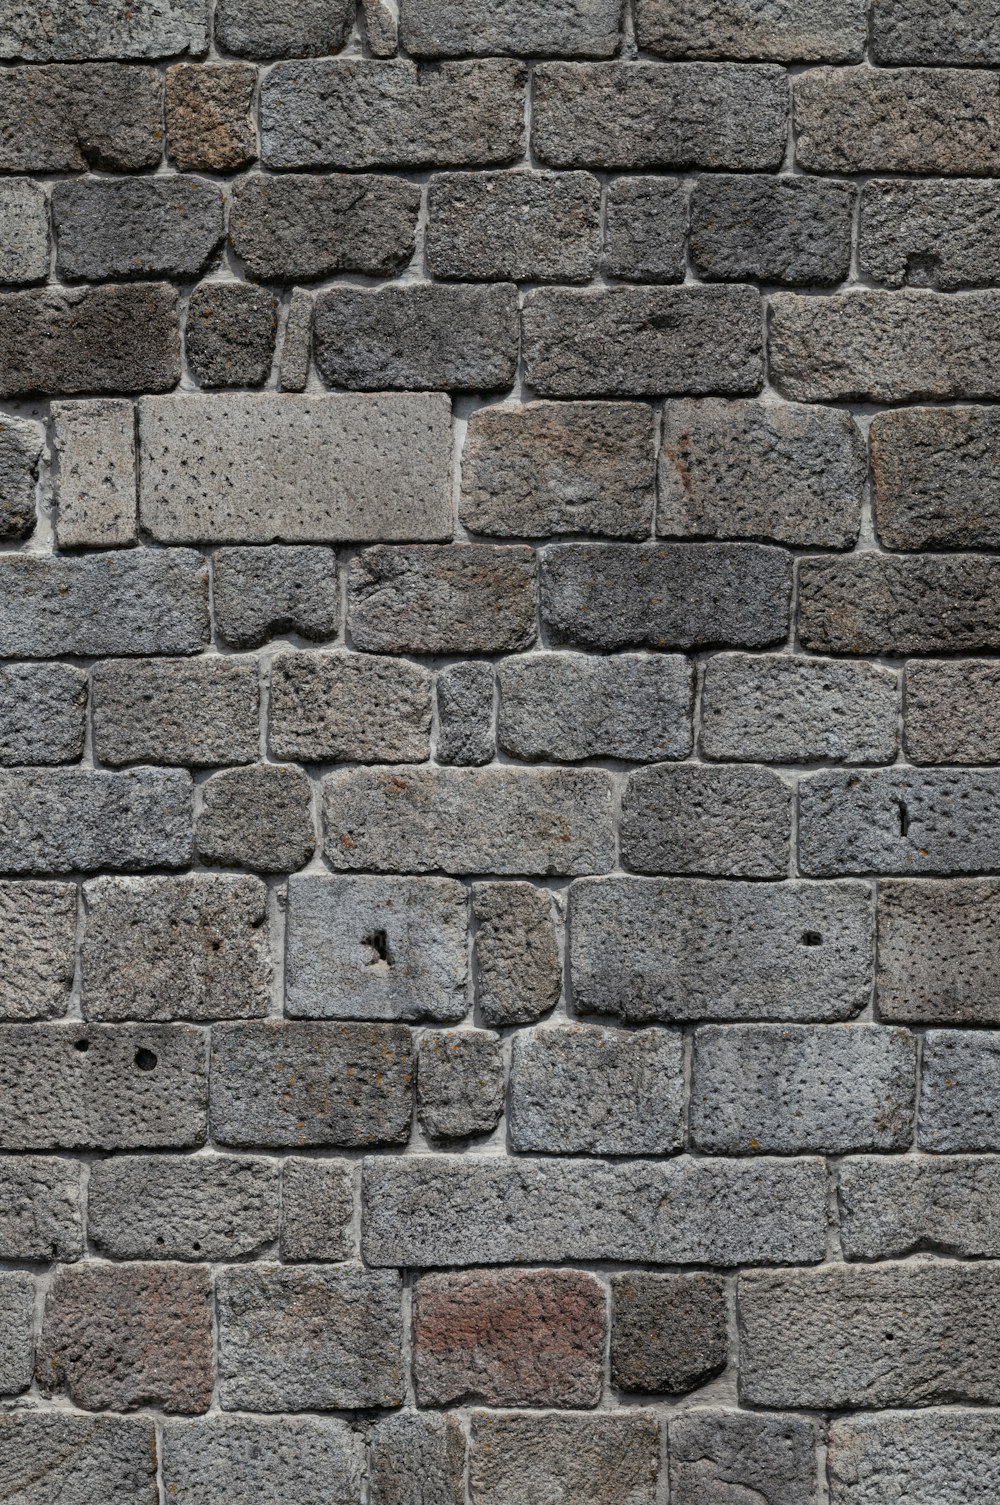 a close up of a brick wall made of stones